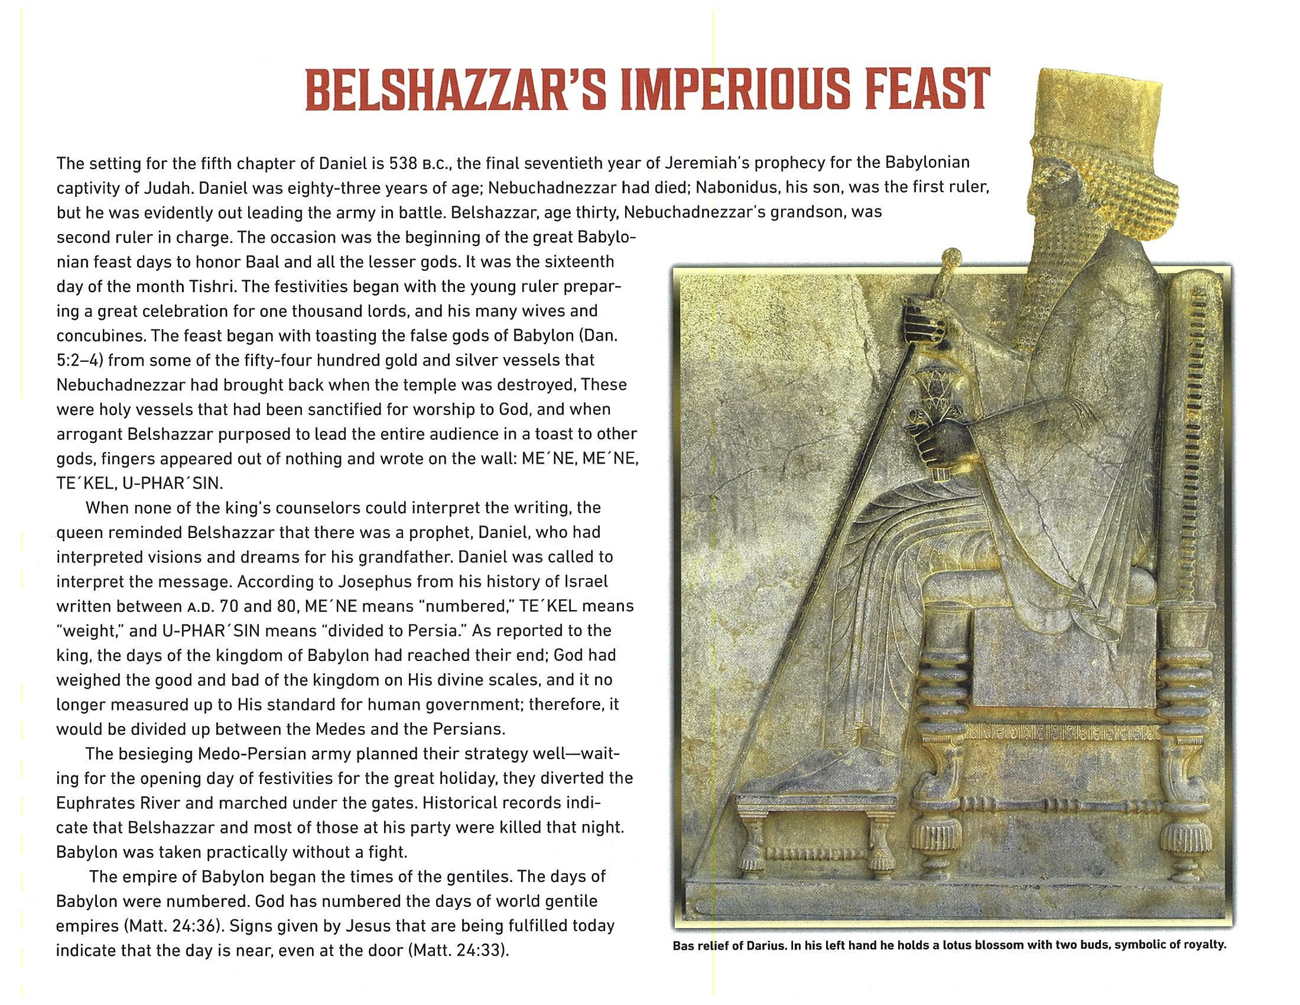 2021 Prophecy Calendar: May - Belshazzer's Imperious Feast